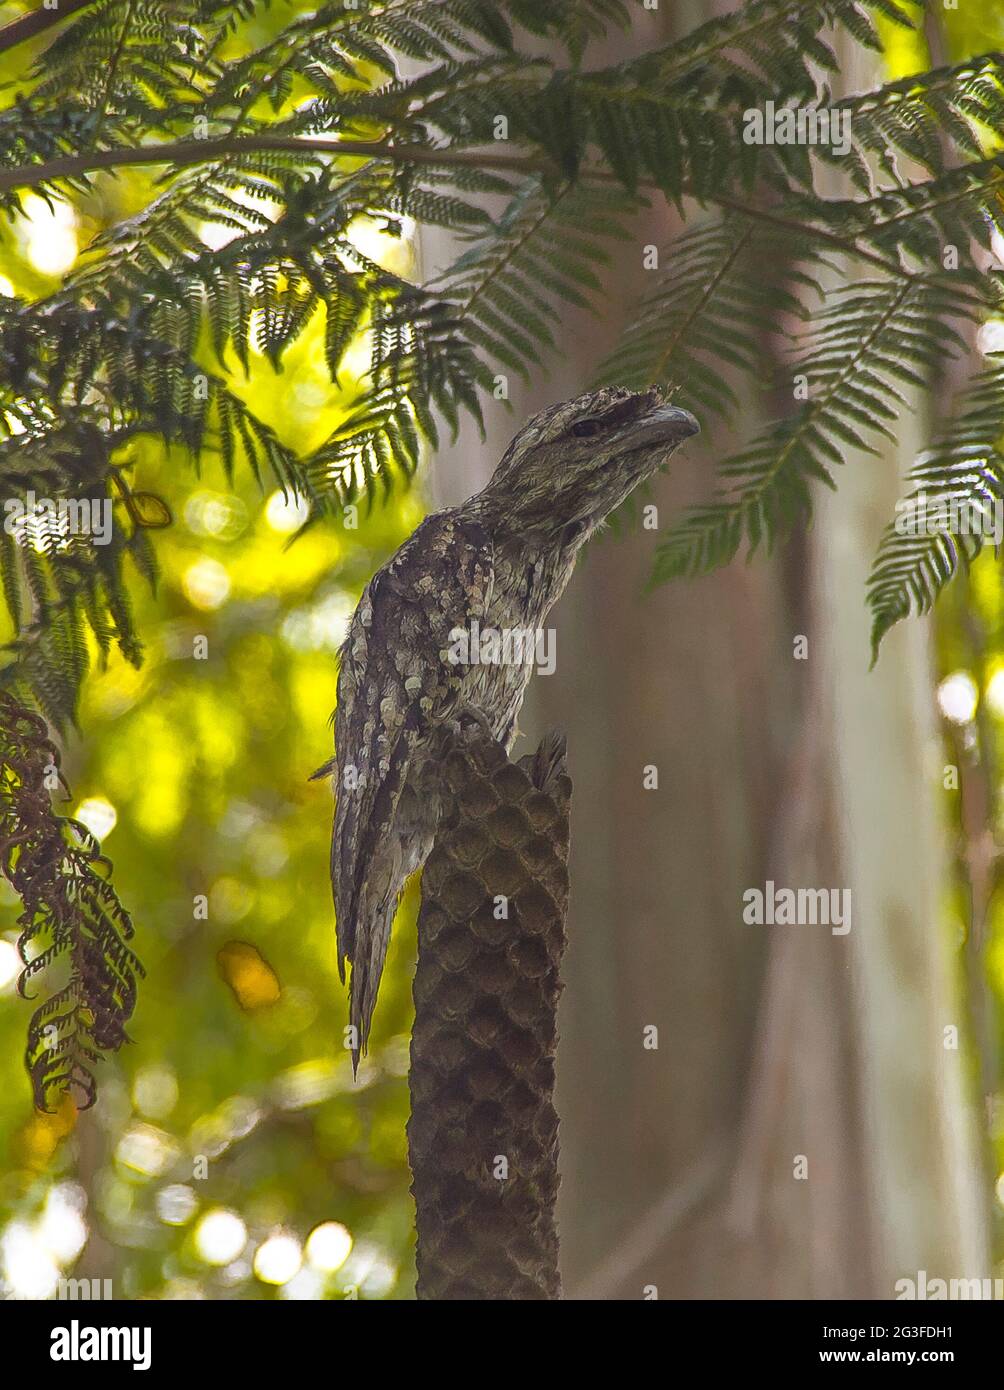 Marbled frogmouth (Podargus ocellatus) in subtropical rainforest on Tamborine Mountain, Australia. Rare and endangered species in forest canopy. Stock Photo